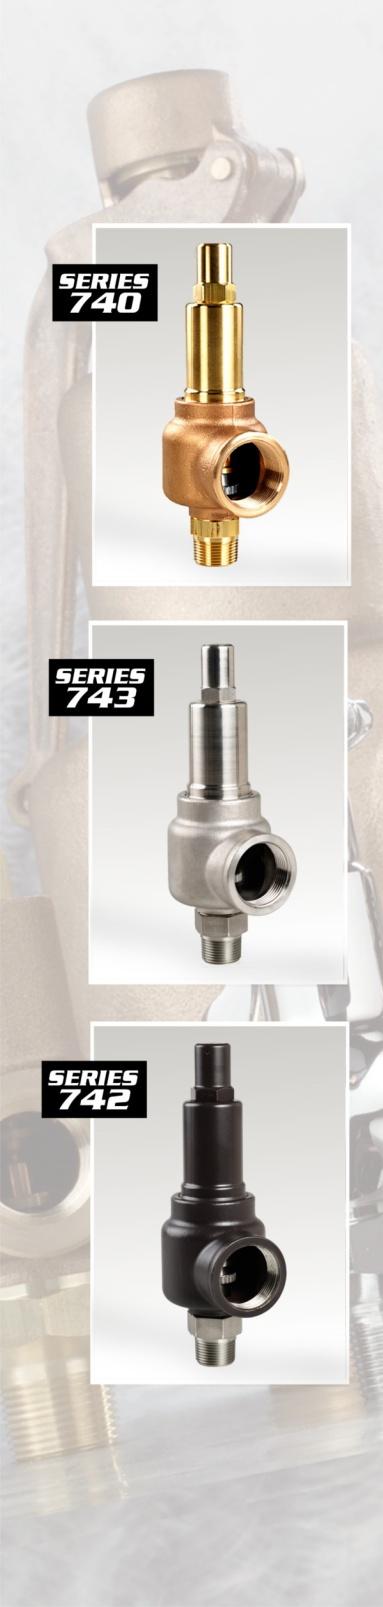 Series 740 Safety Valves Series 740 safety and relief valve is designed for accuracy and reliability. Engineered for heavy-duty industrial usage.